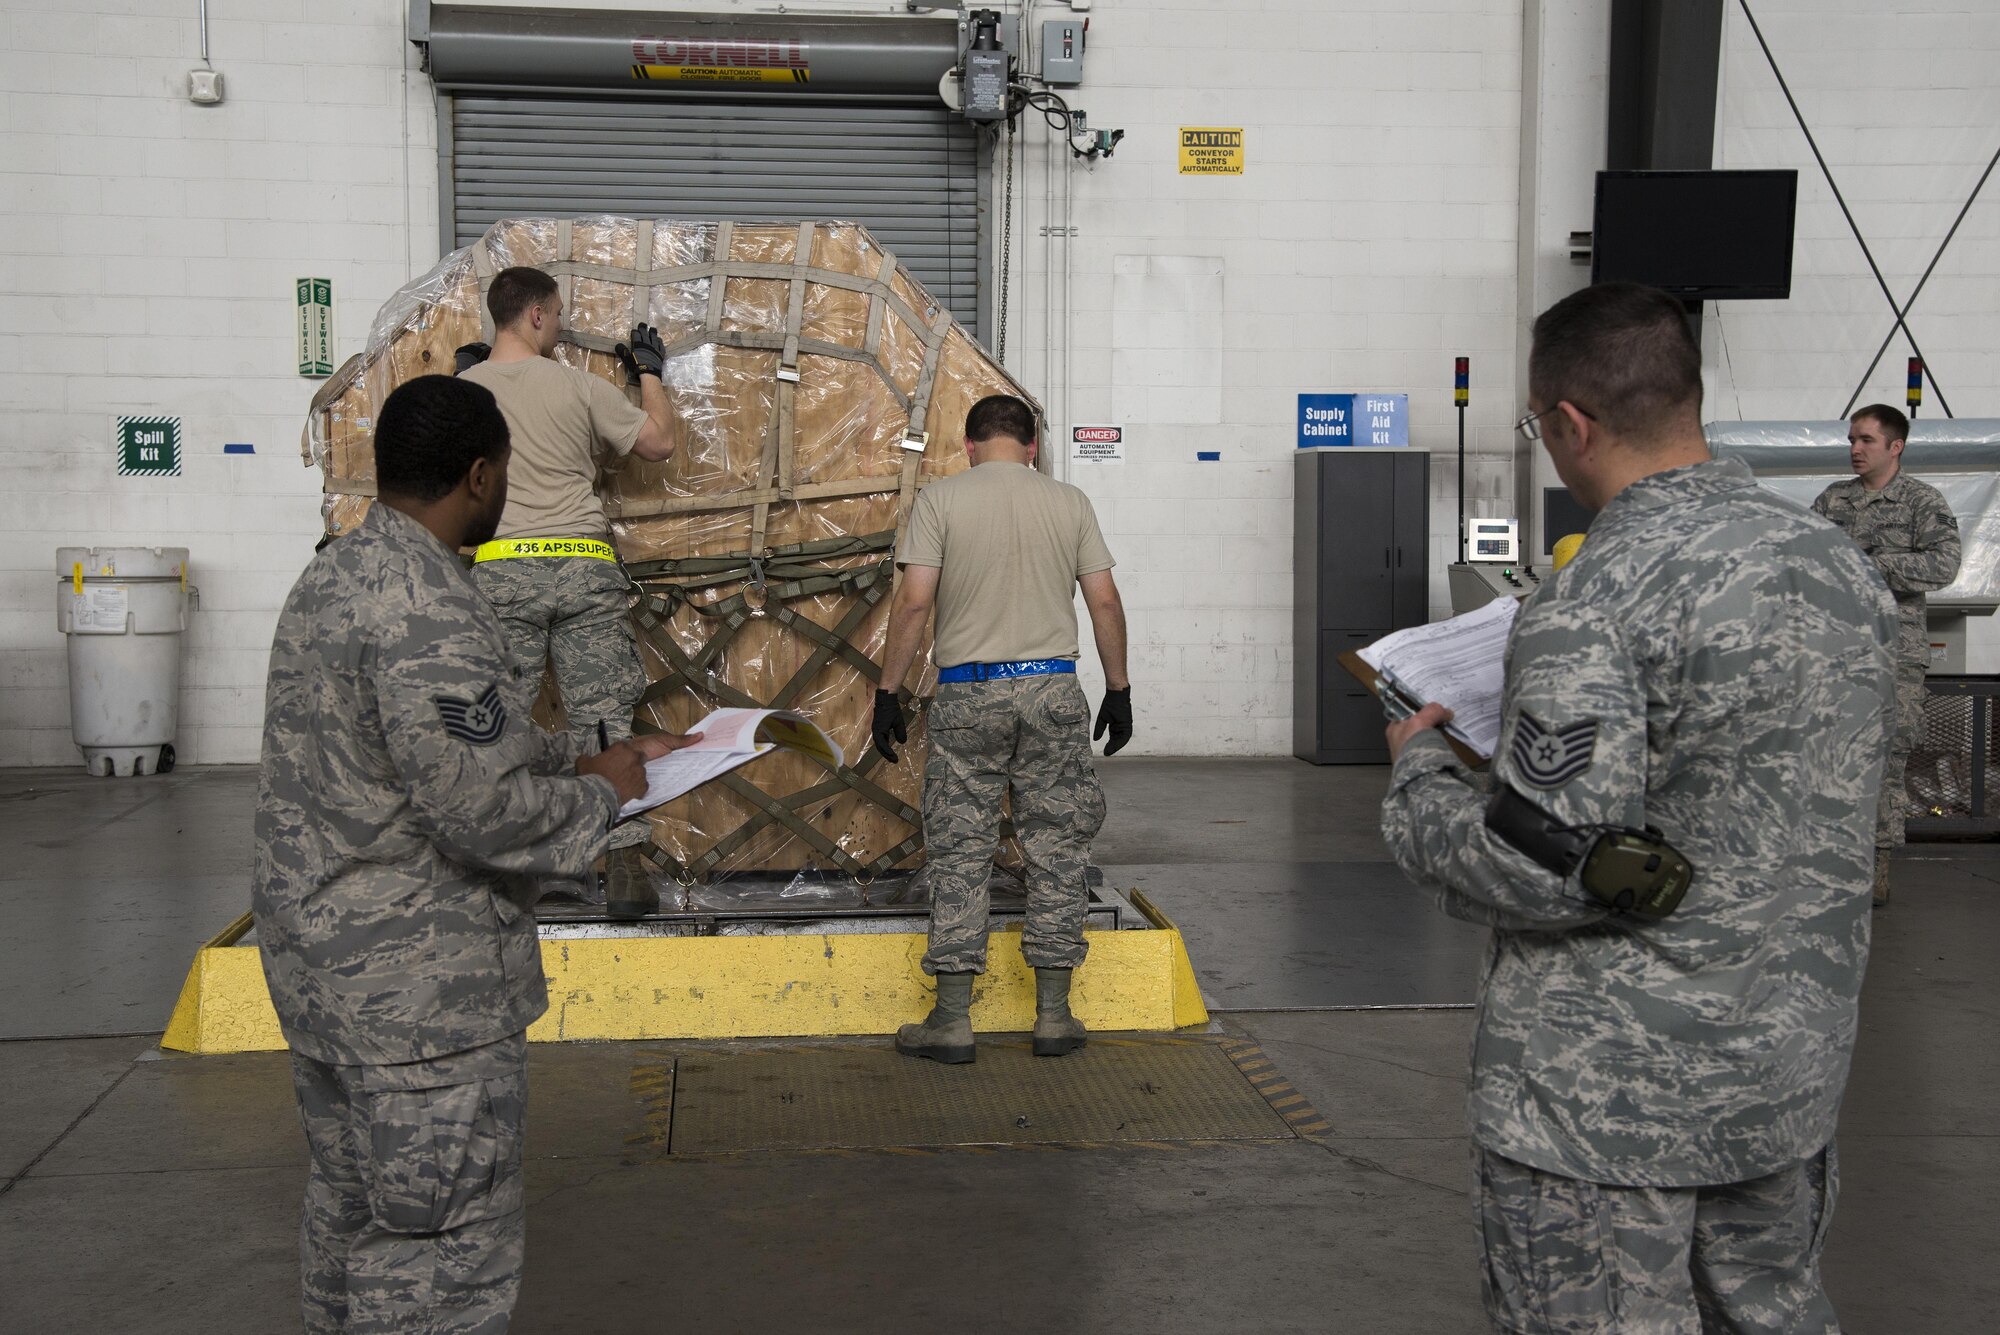 Tech. Sgts. Randie Page and Jeffrey Kach, 436th Aerial Port Squadron Air Transportation Standardization and Evaluations Program evaluators, observe Airmen build a pallet Jan. 12, 2017, at the aerial port on Dover Air Force Base, Del. The ATSEP program was established in 2016 to realign the existing evaluations program with the Air Force Inspection System. (U.S. Air Force photo by Senior Airman Aaron J. Jenne)